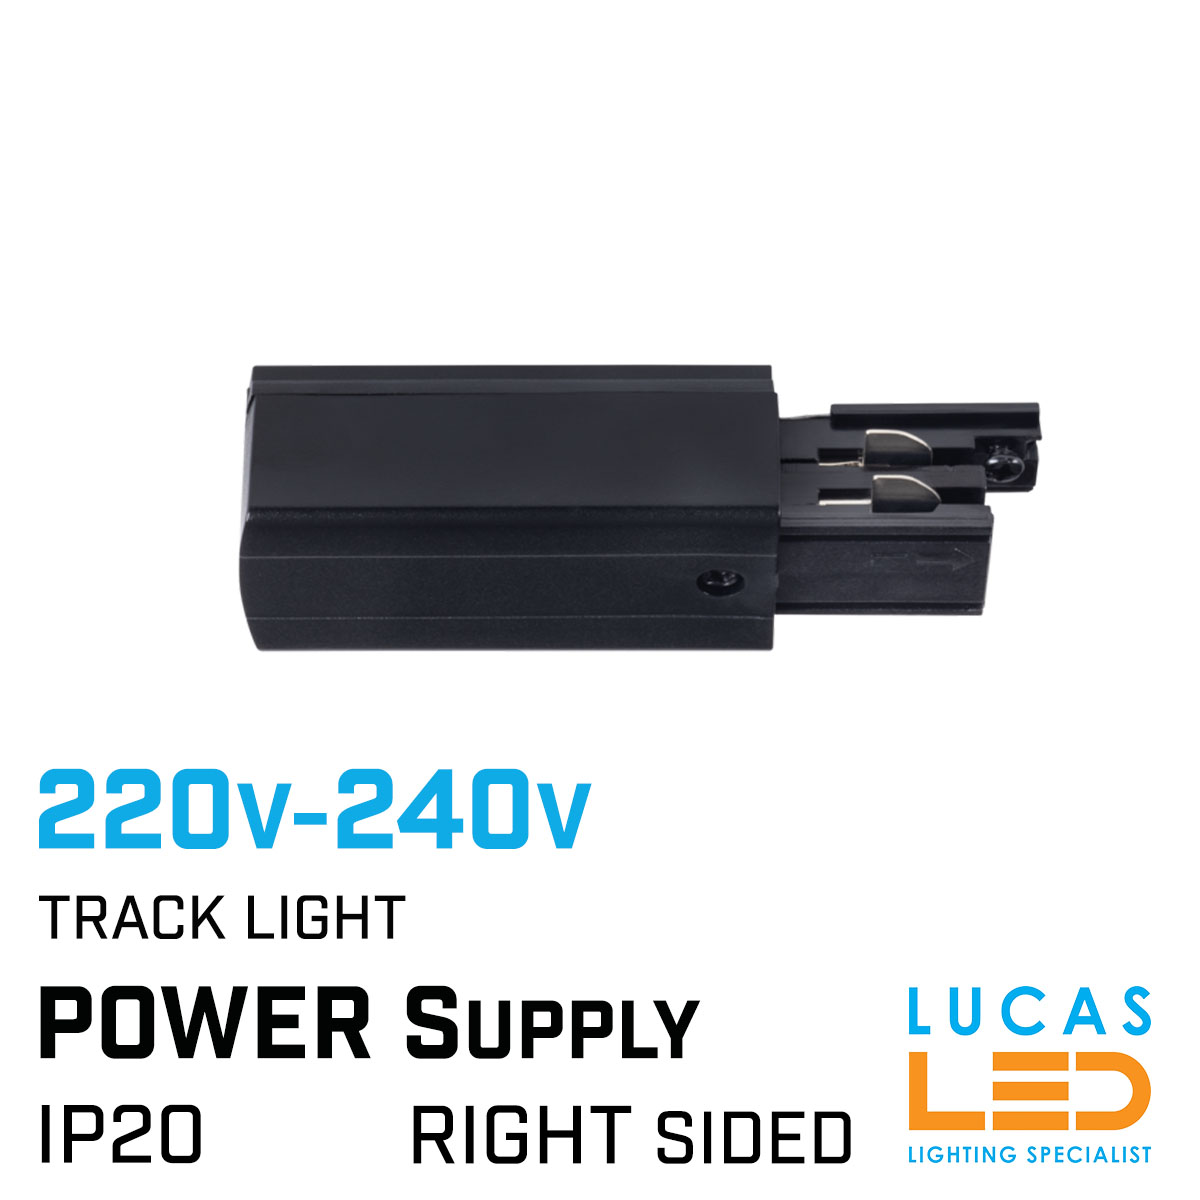 Power Supply Connector type - RIGHT Sided - for Rail - LED Track Lighting system - 3-phase - 3 circuit - Black